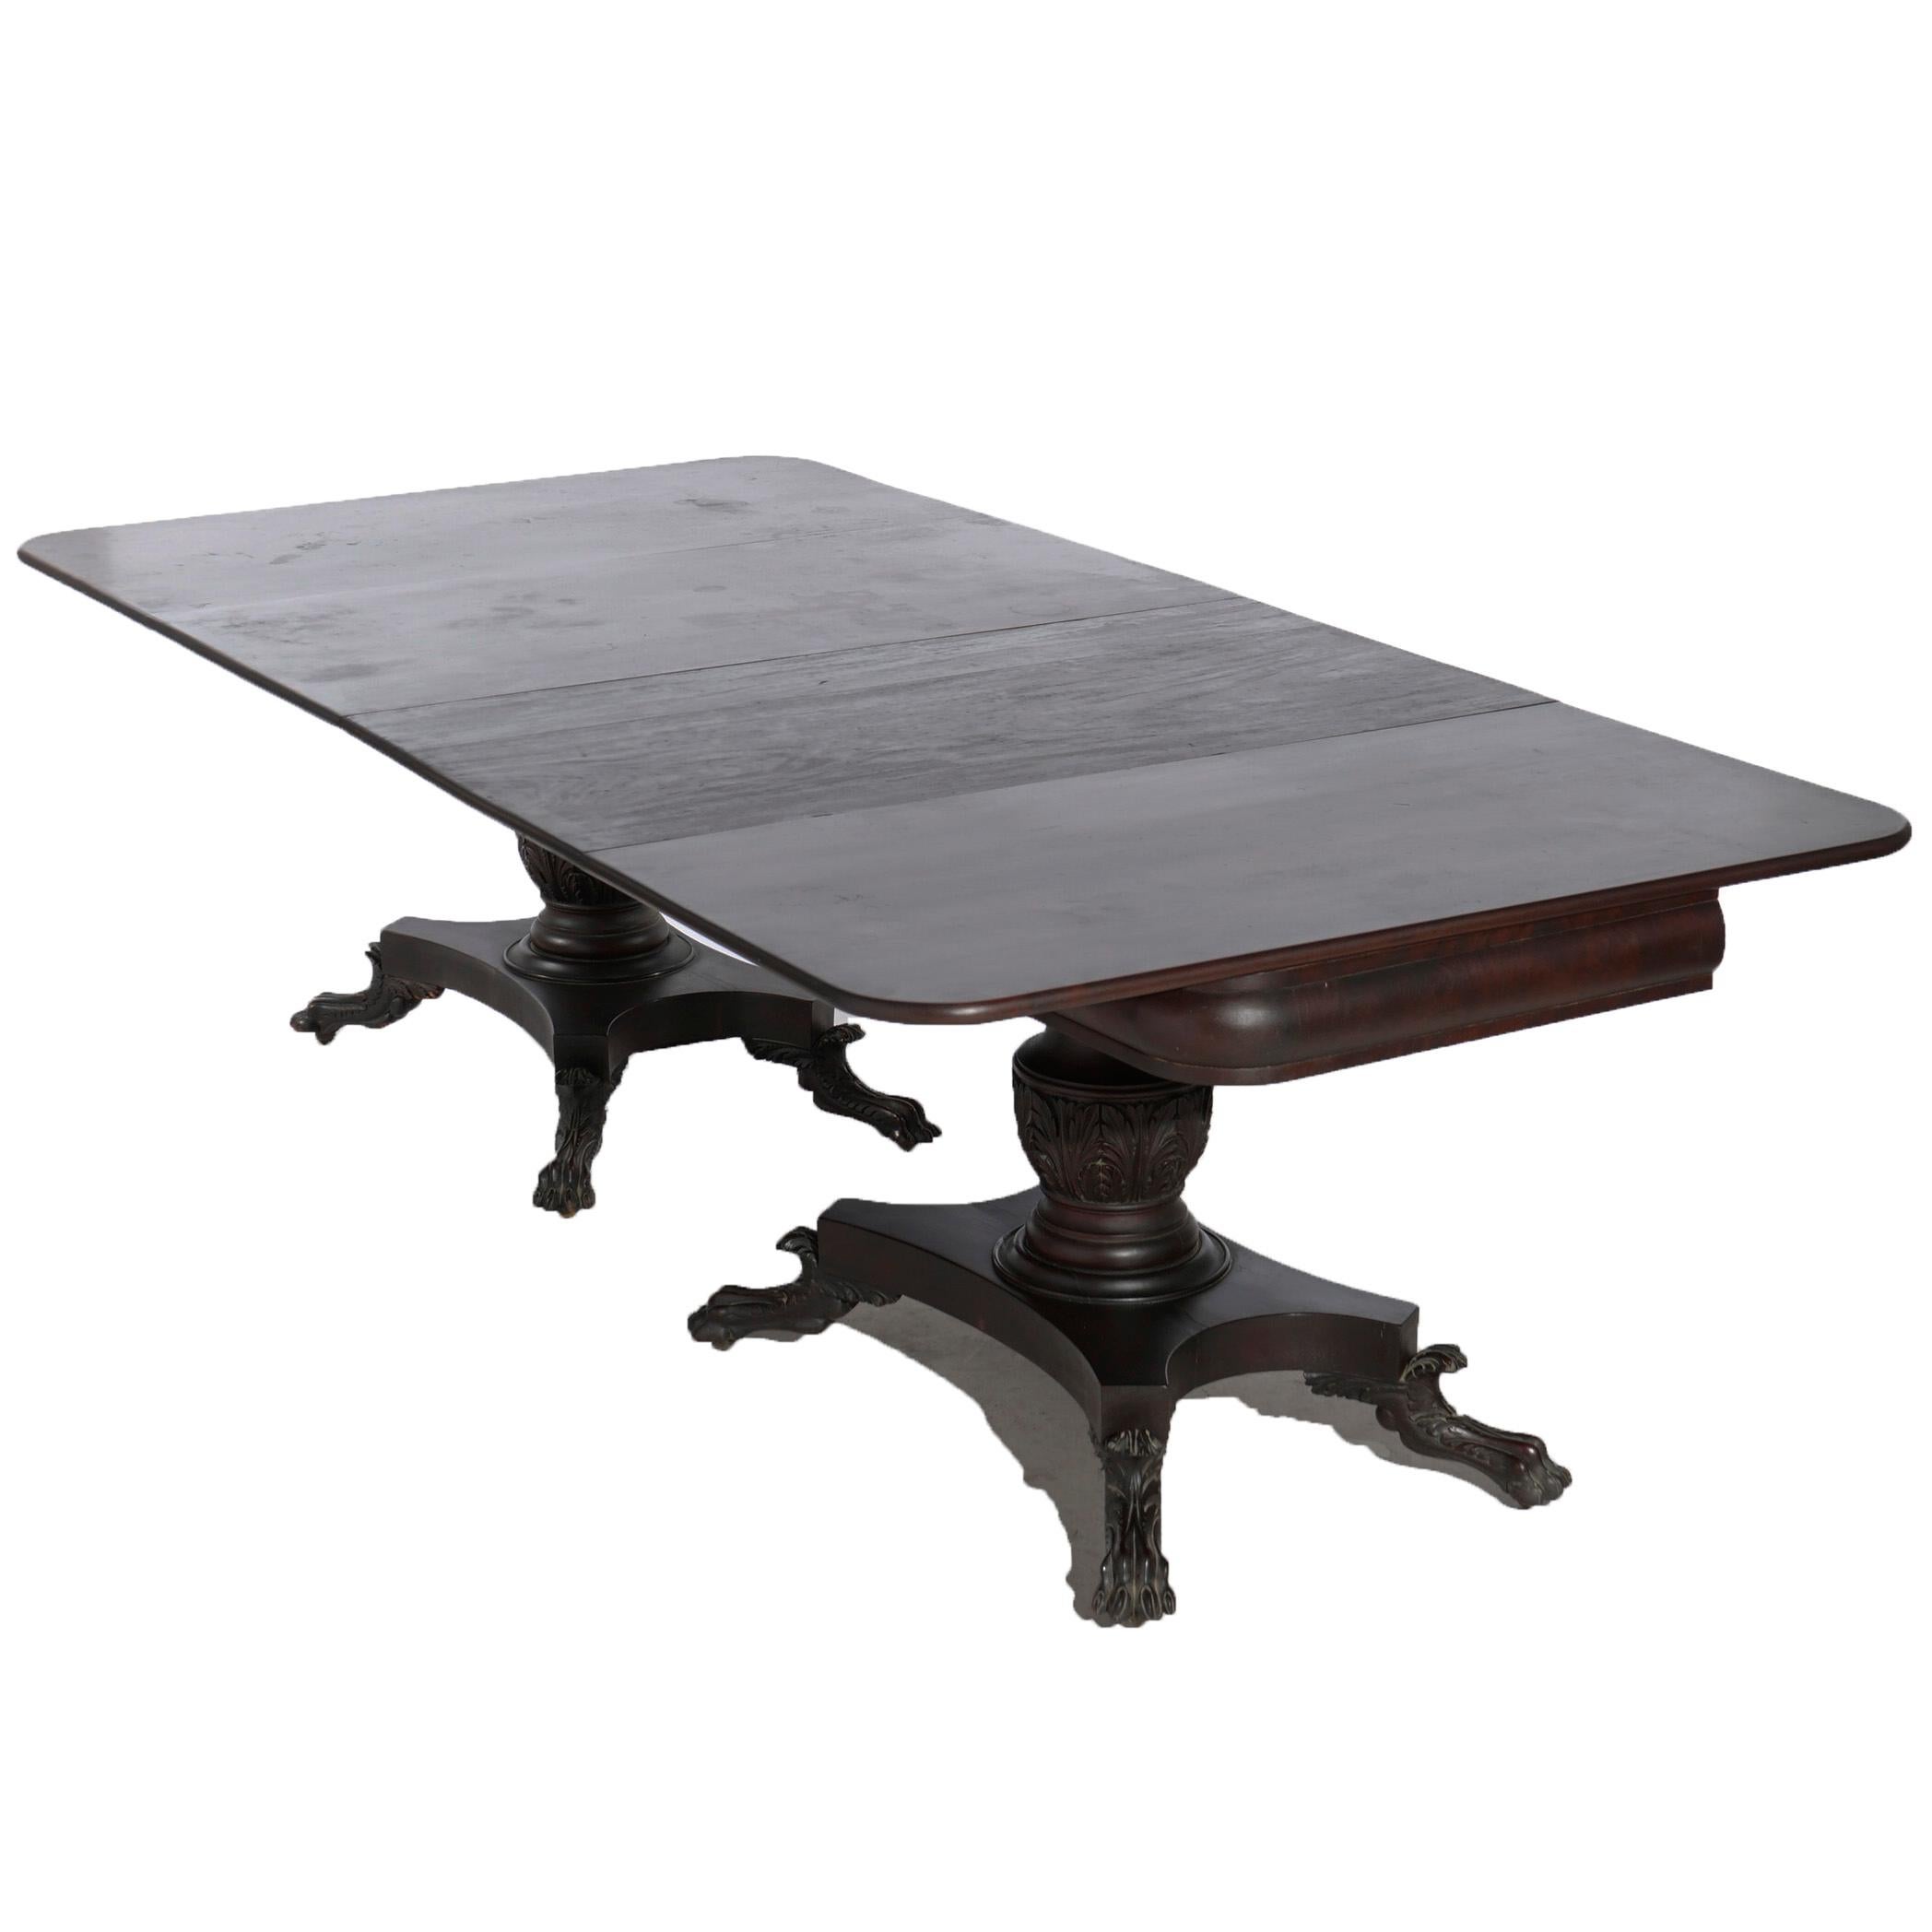 An antique American Empire Greco banquet dining table offers flame mahogany construction in Neoclassical form with drop leaf dining top over carved urn form double pedestals and raised on bases with carved paw feet, c1840

Measures- Overall 100.5''H